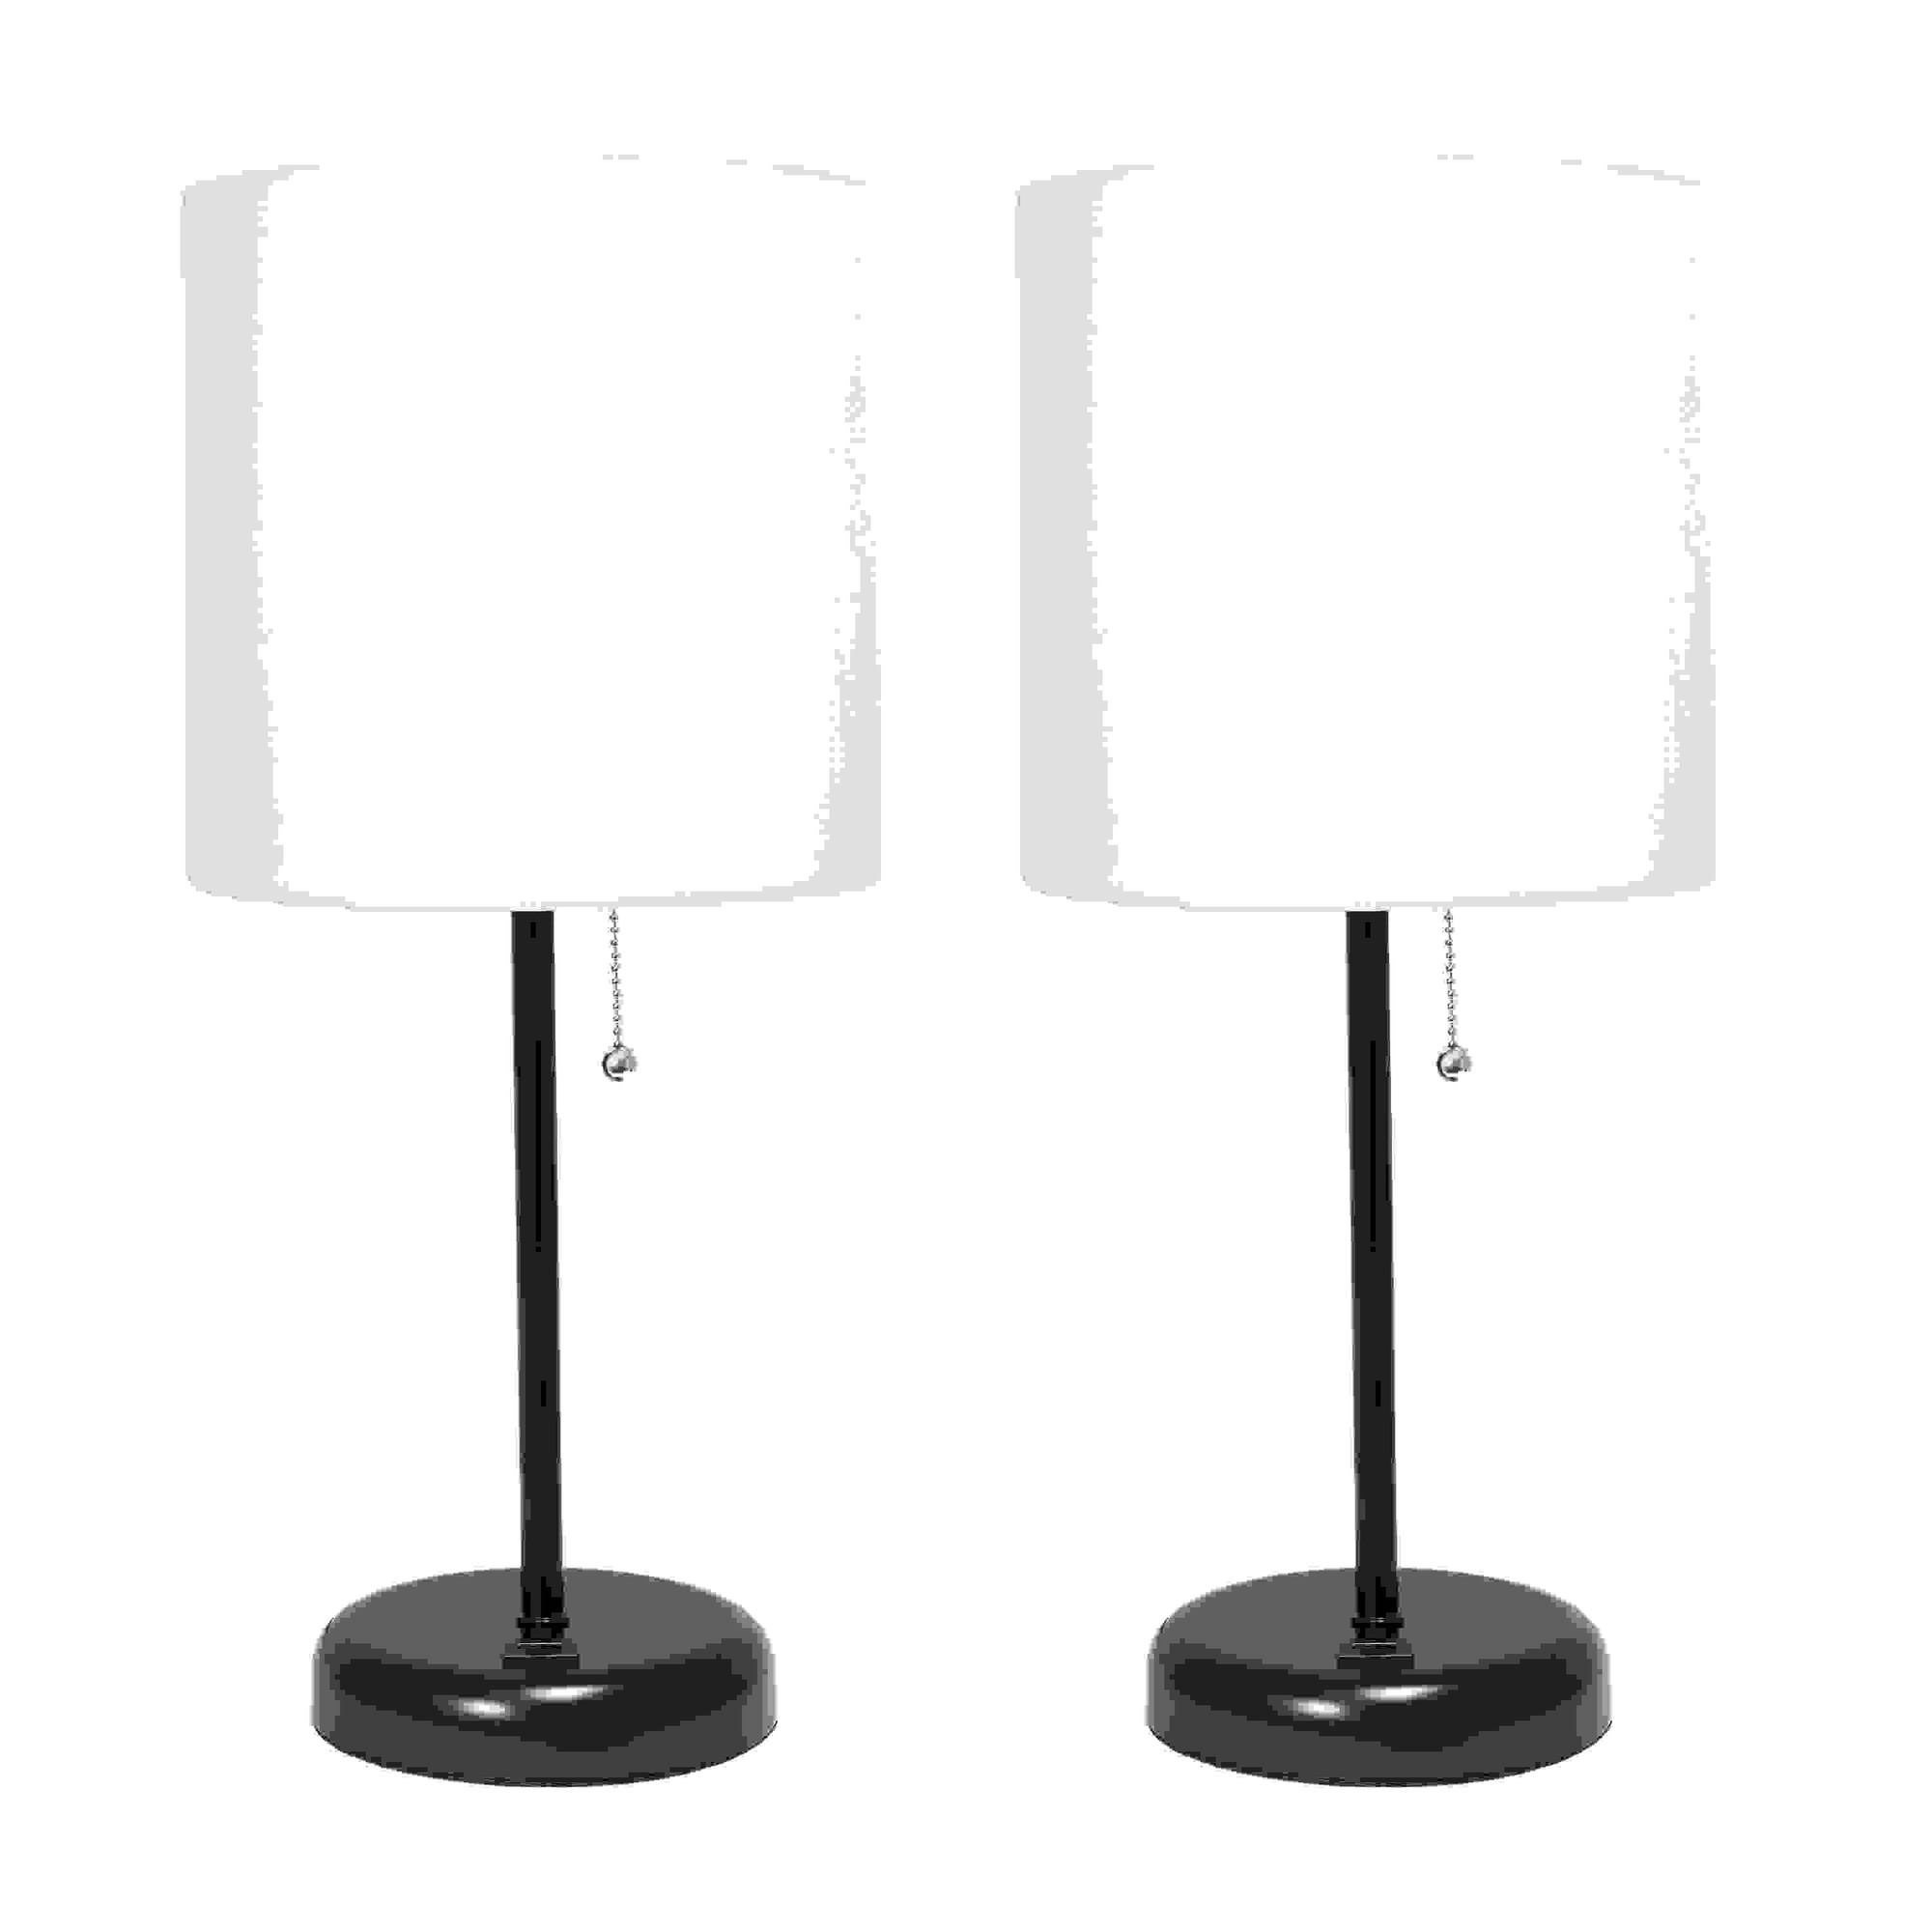 Simple Designs Black Stick Lamp with USB charging port and Fabric Shade 2 Pack Set, White